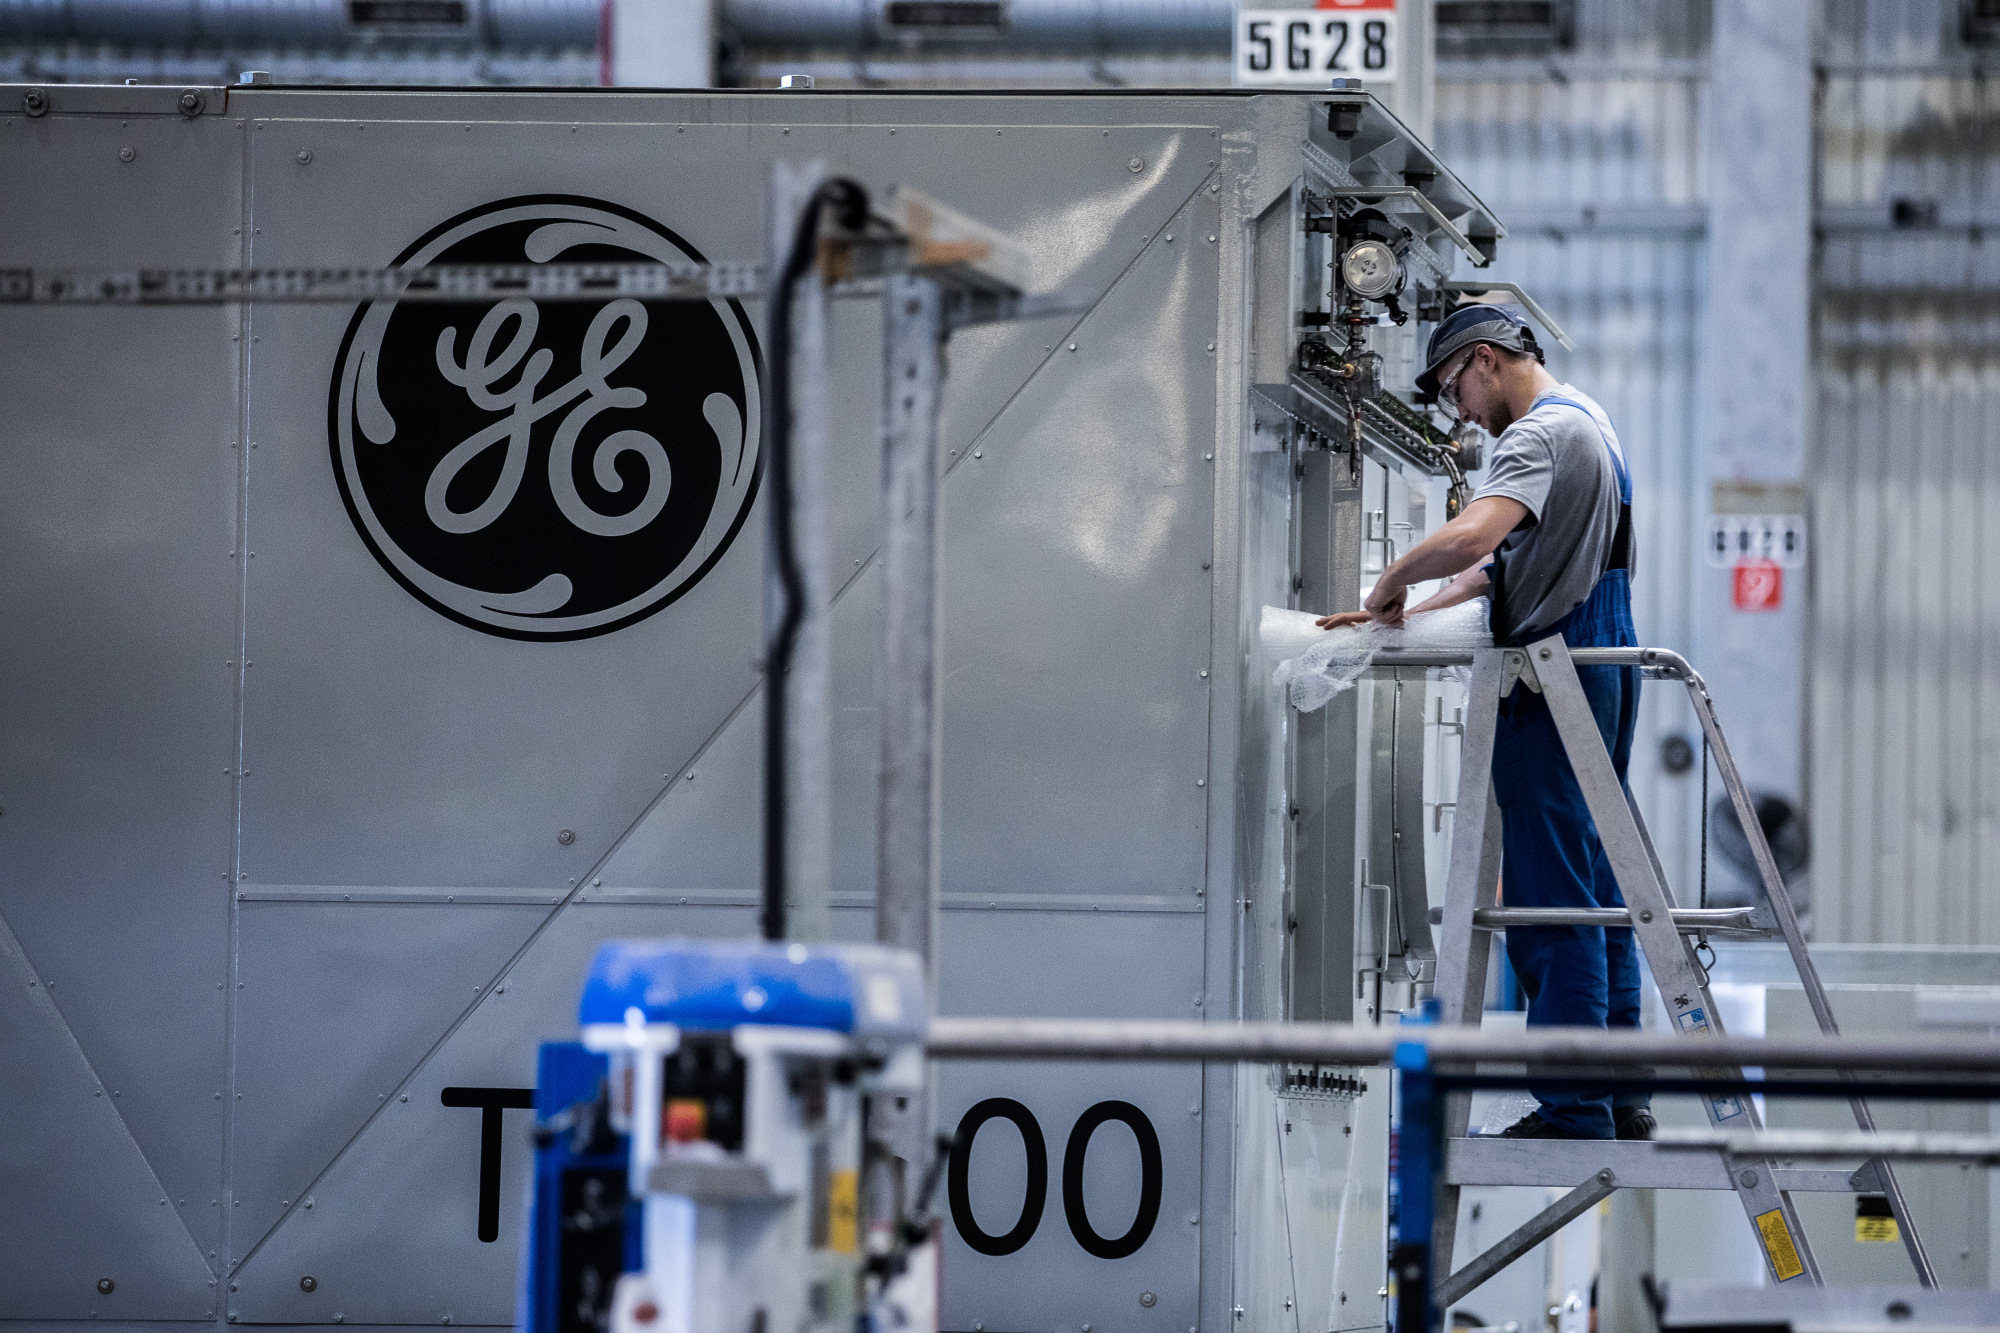 An employee unwraps turbine components inside the General Electric Co. power plant in Veresegyhaz, Hungary. Photographer: Akos Stiller/Bloomberg